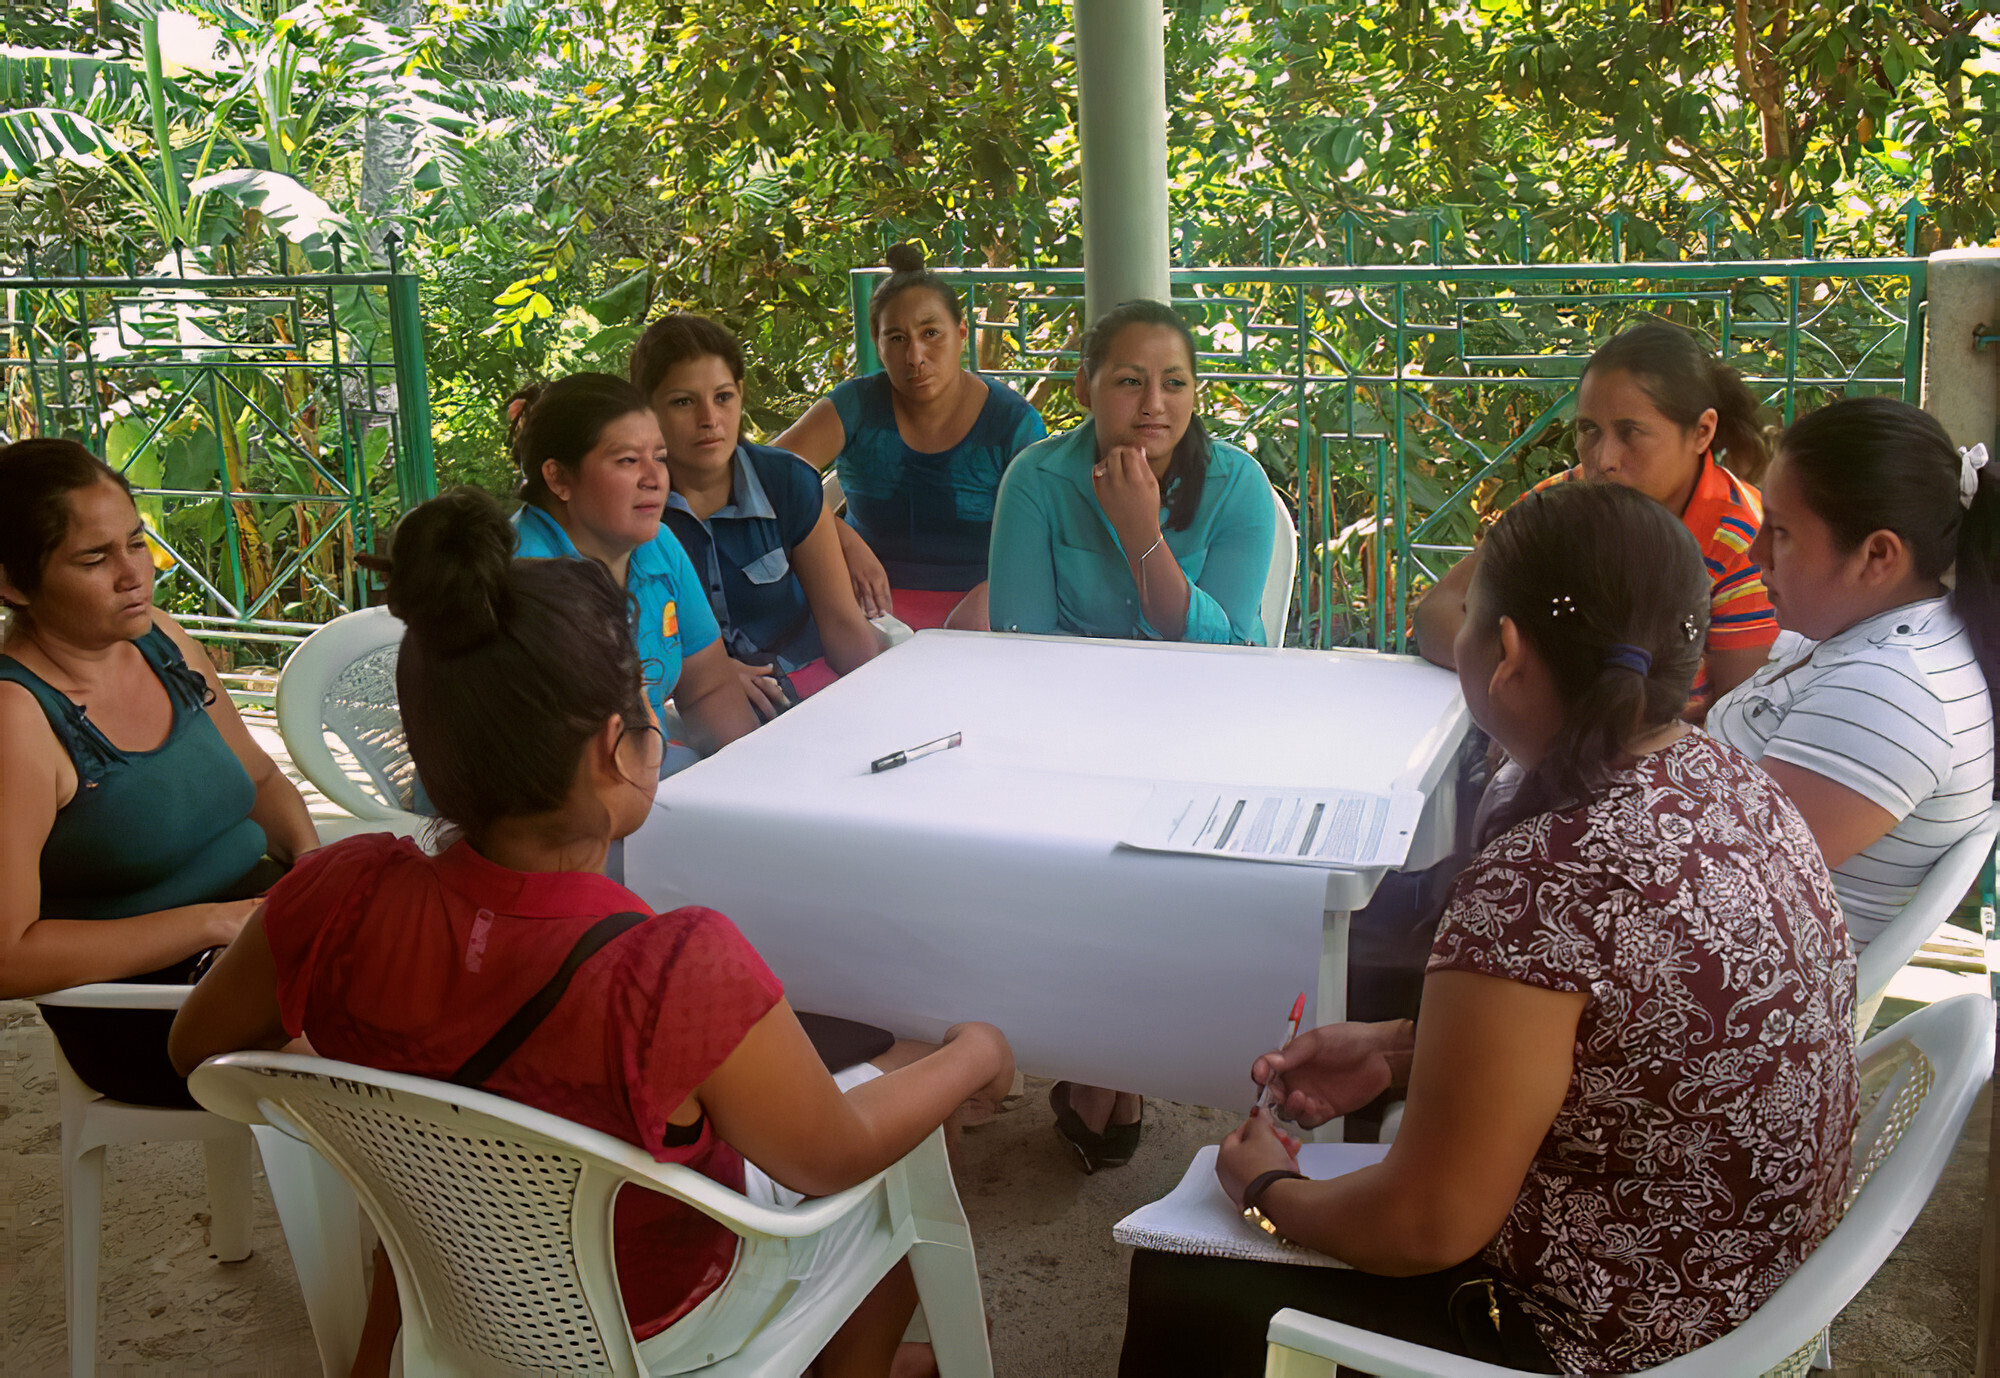 Nine Salvadoran woman sit around a table with a giant piece of paper on it